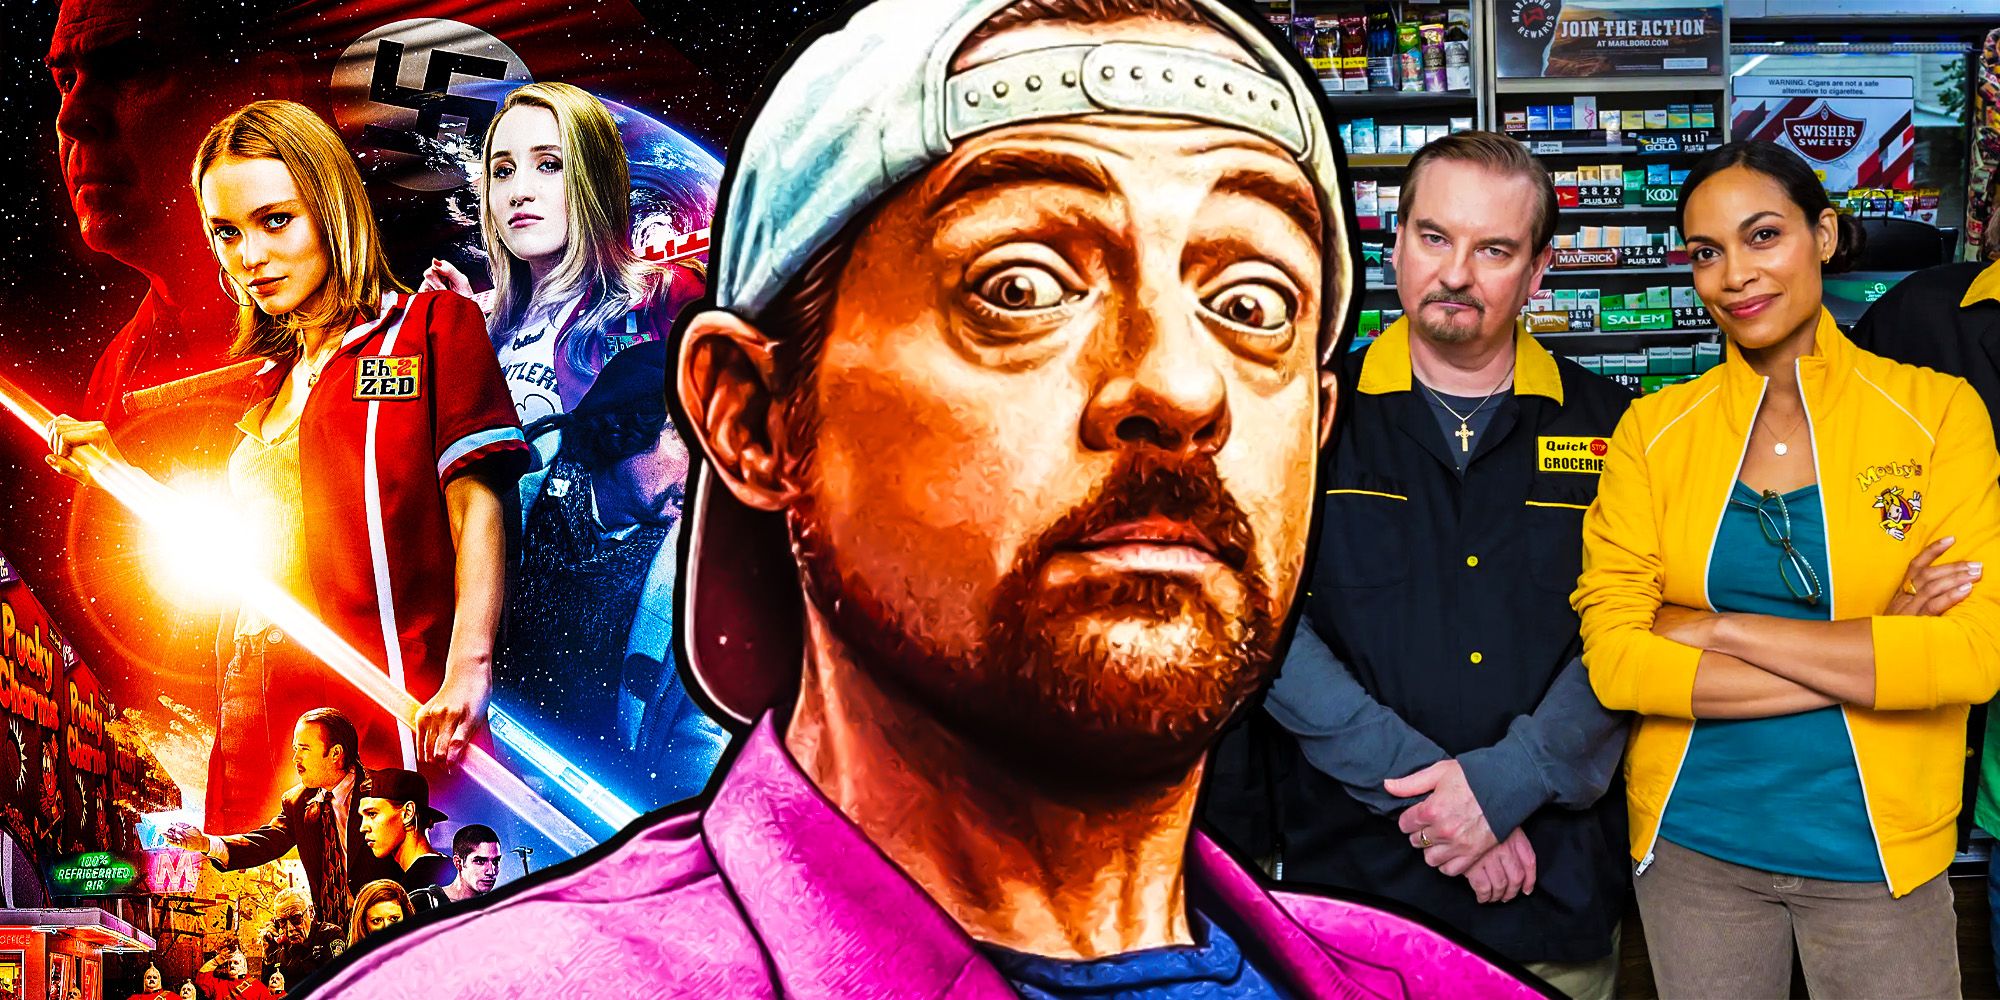 kevin smith needs to finish his true north trilogy instead of clerks 3